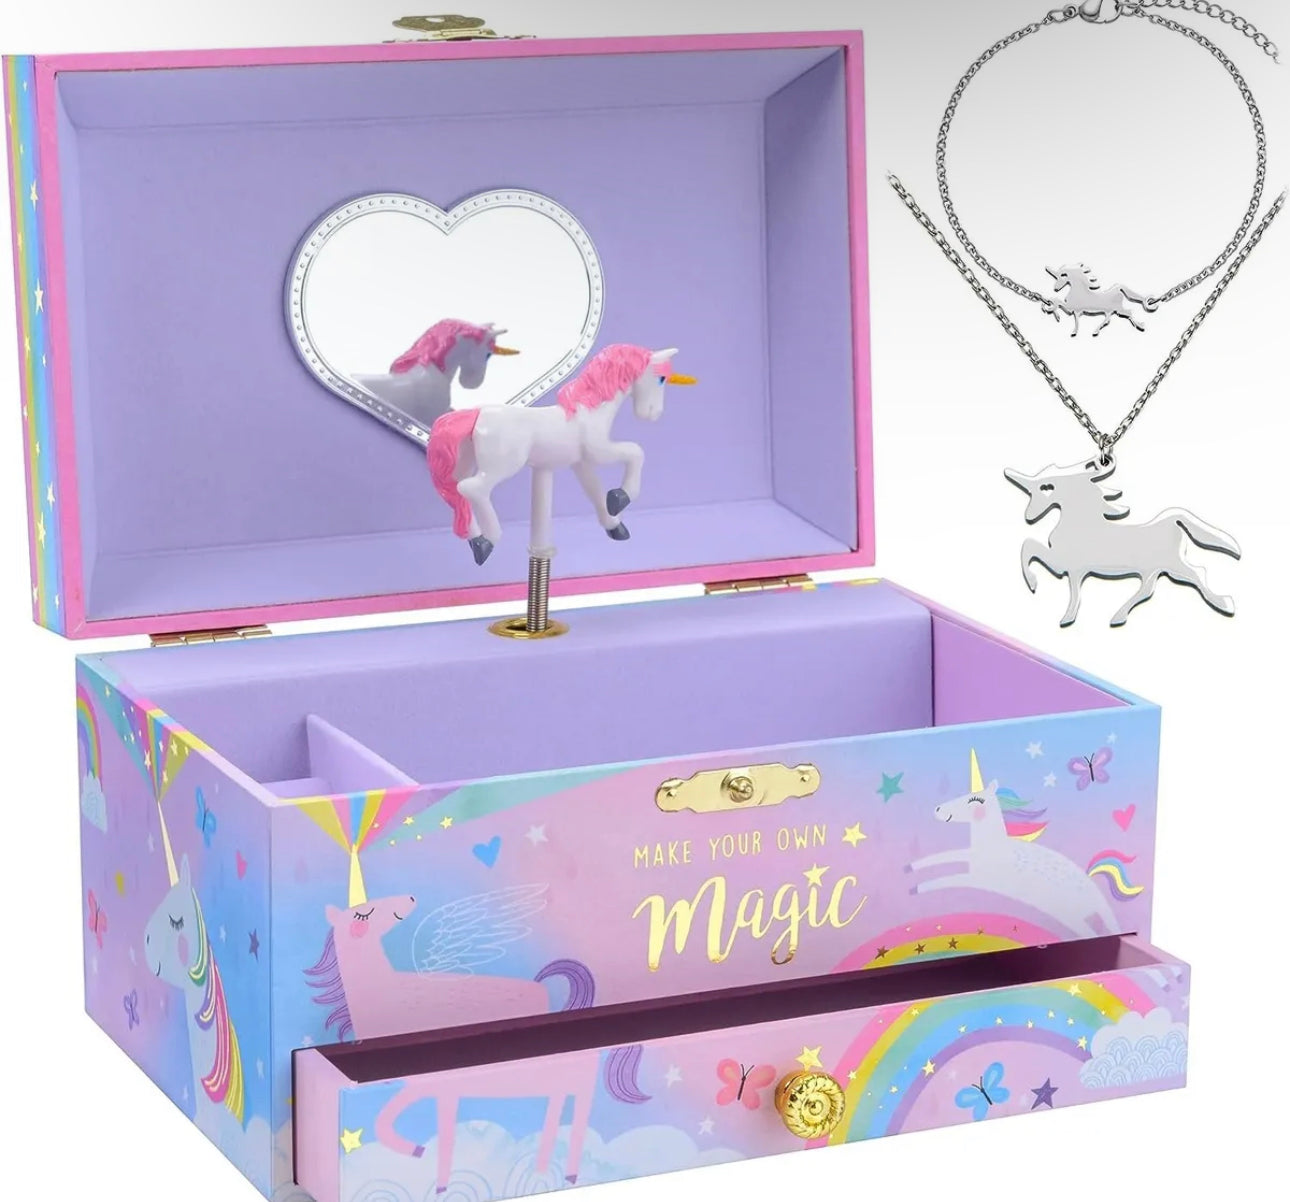 Unicorn musical jewellery box with necklace and bracelet